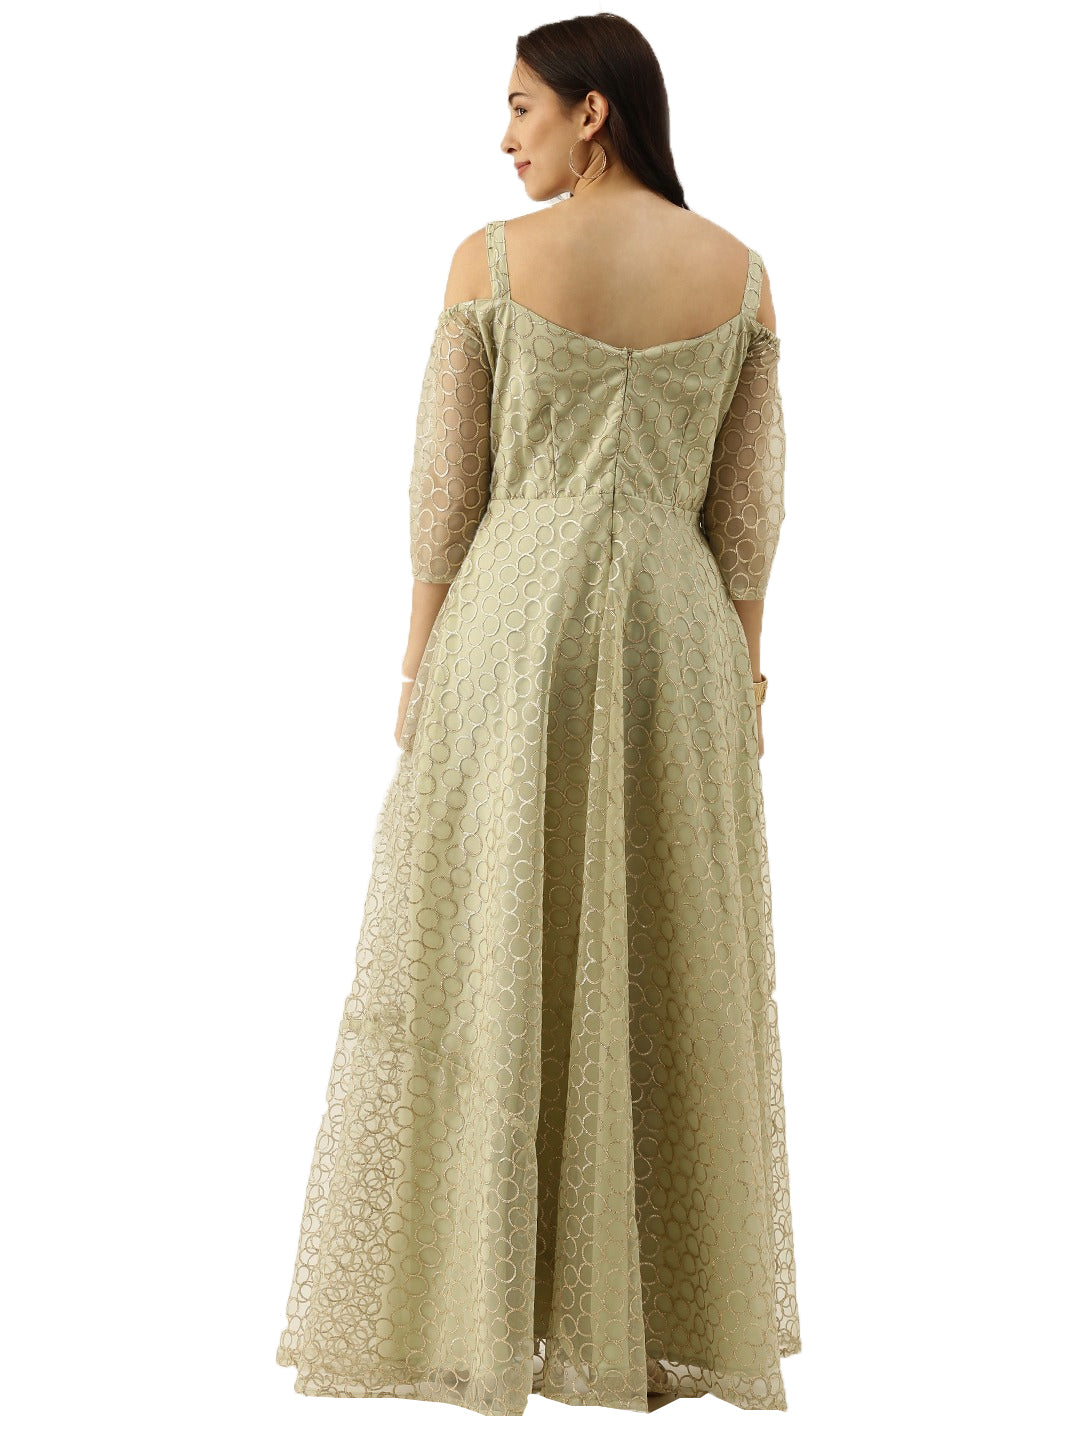 Green-Net-Embroidered-Strap-Neck-Gown